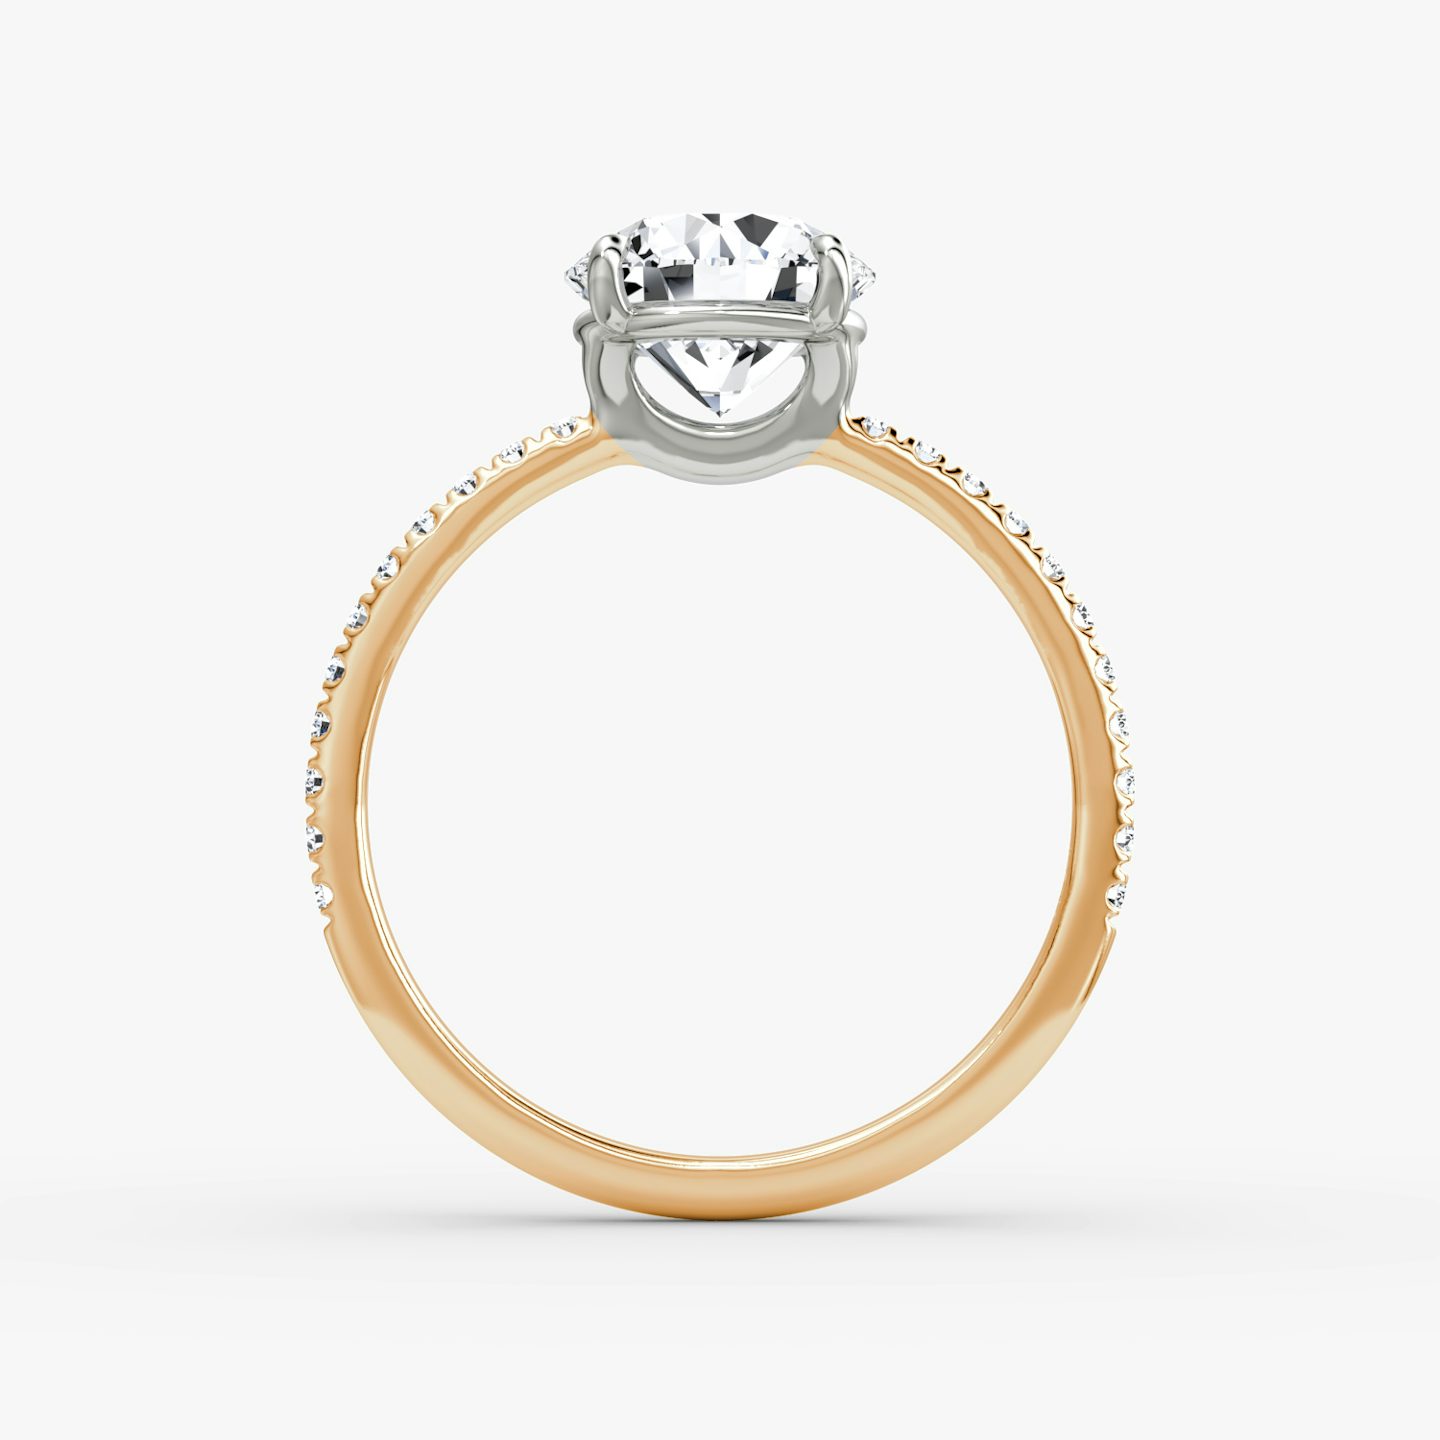 The Signature | Round Brilliant | 14k | 14k Rose Gold and Platinum | Band: Pavé | Band width: Standard | Carat weight: 2 | Setting style: Plain | Diamond orientation: vertical